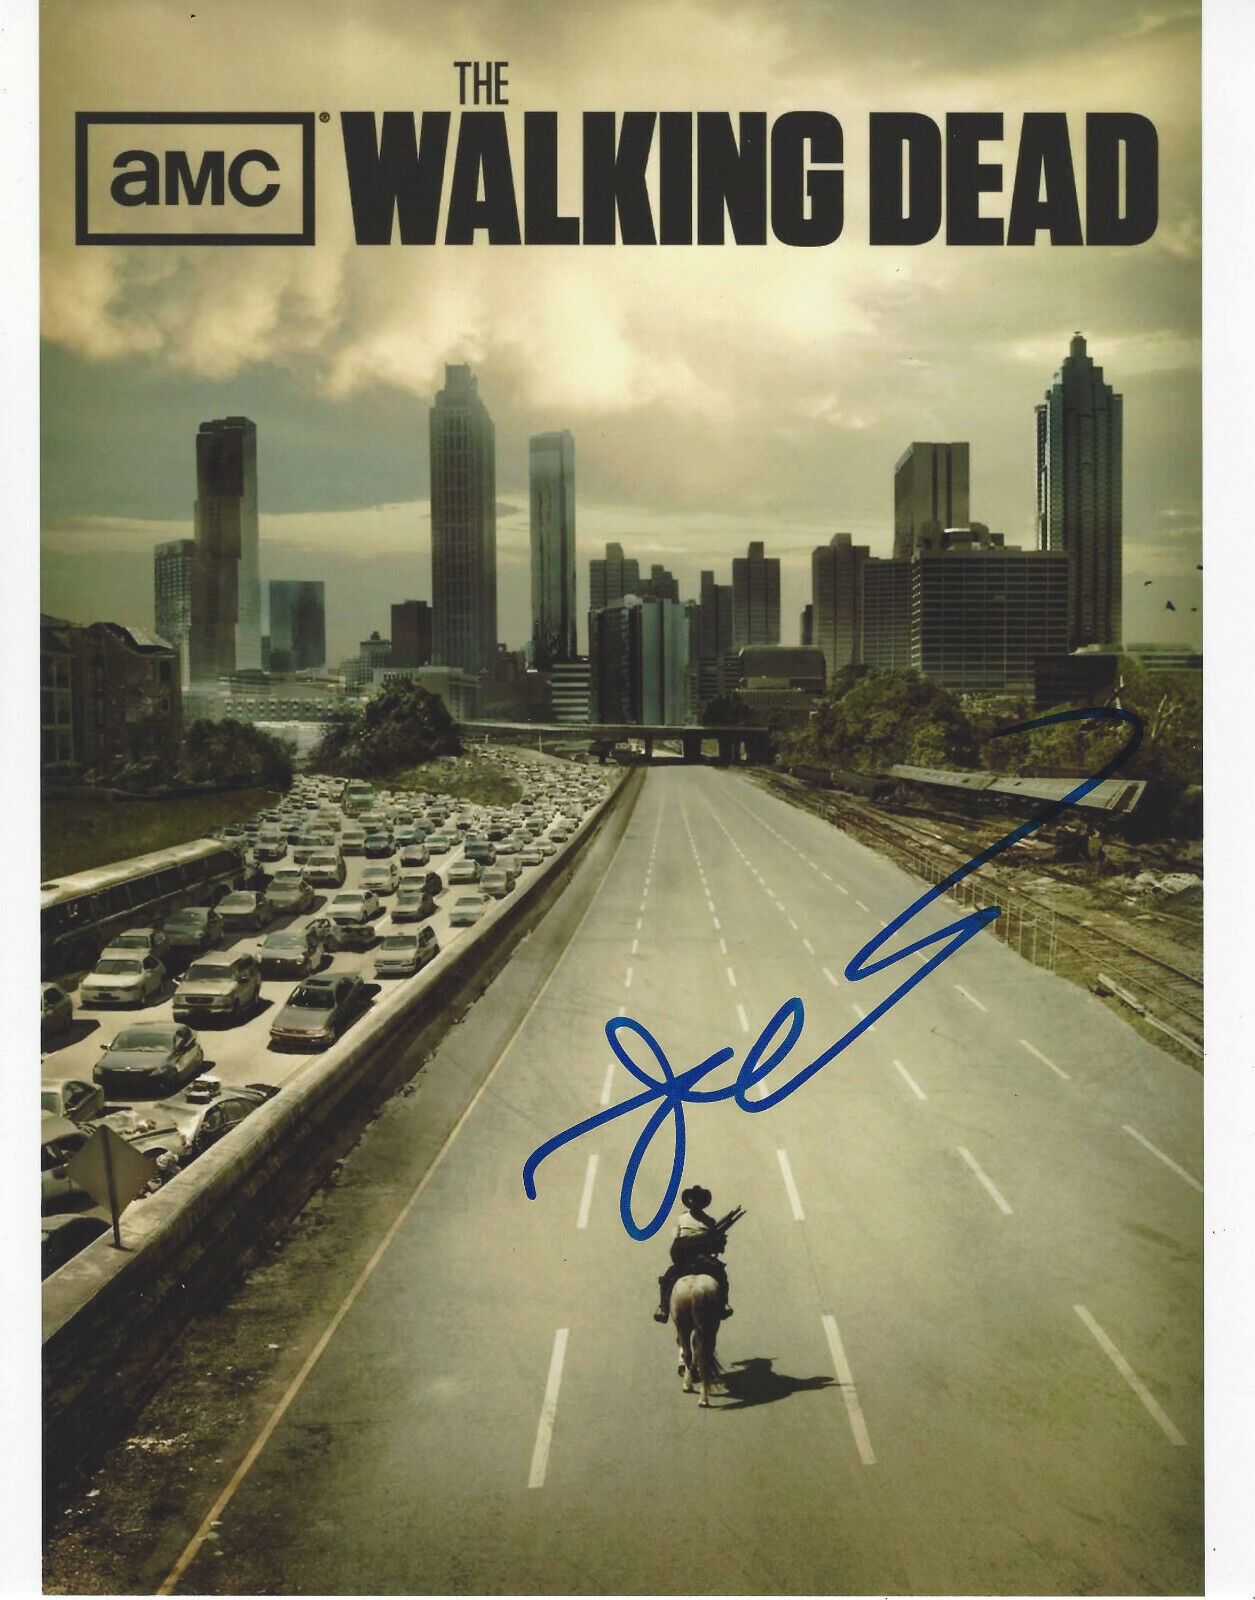 ROBERT KIRKMAN - THE WALKING DEAD CREATOR - SIGNED AUTHENTIC 8x10 Photo Poster painting w/COA